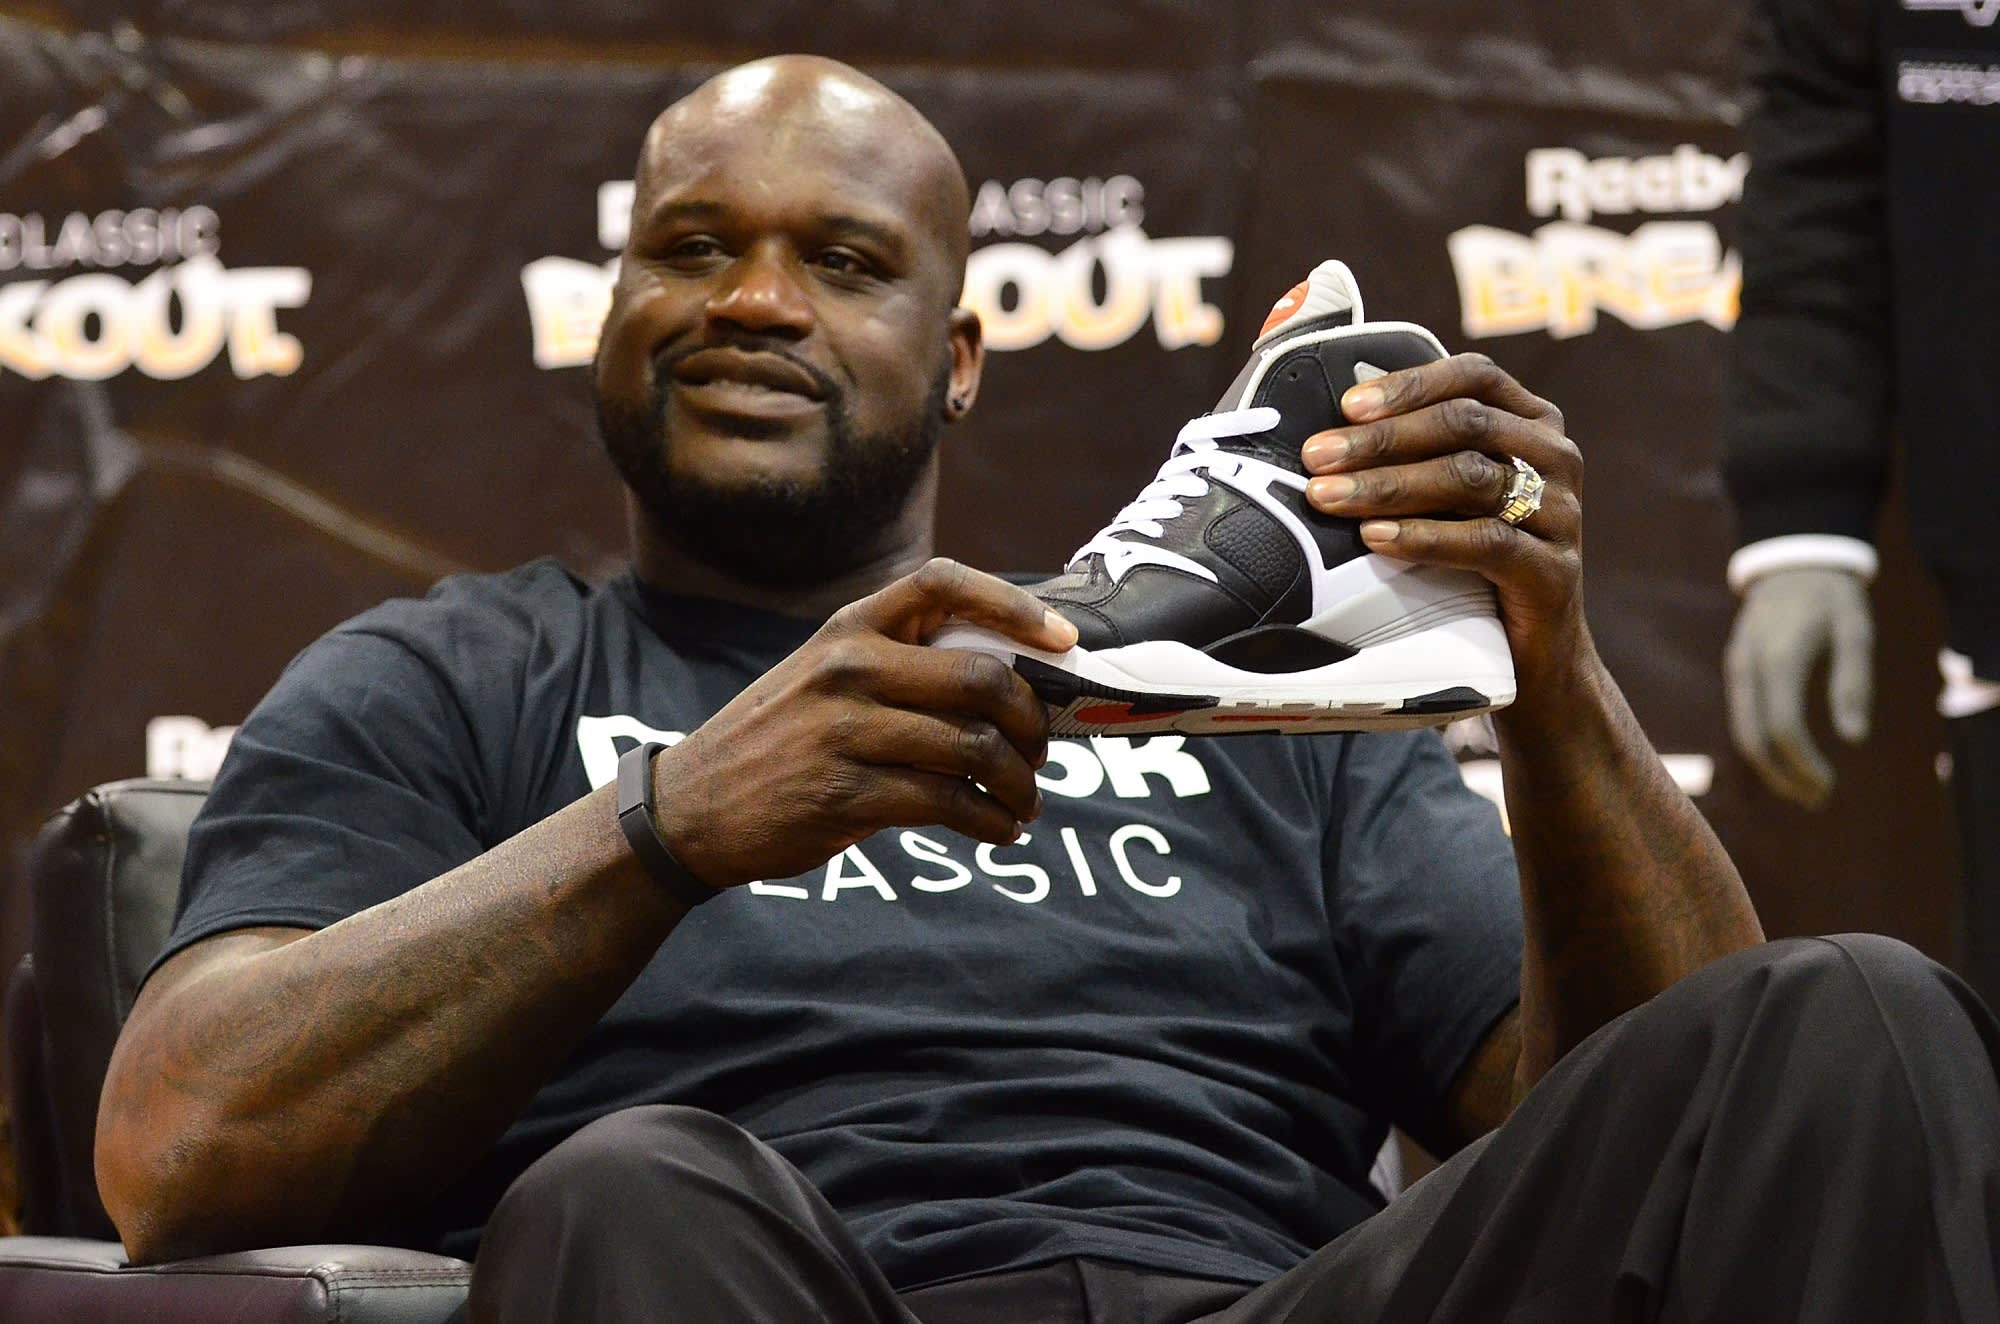 NBA hall-of-famer Shaquille O'Neal says 